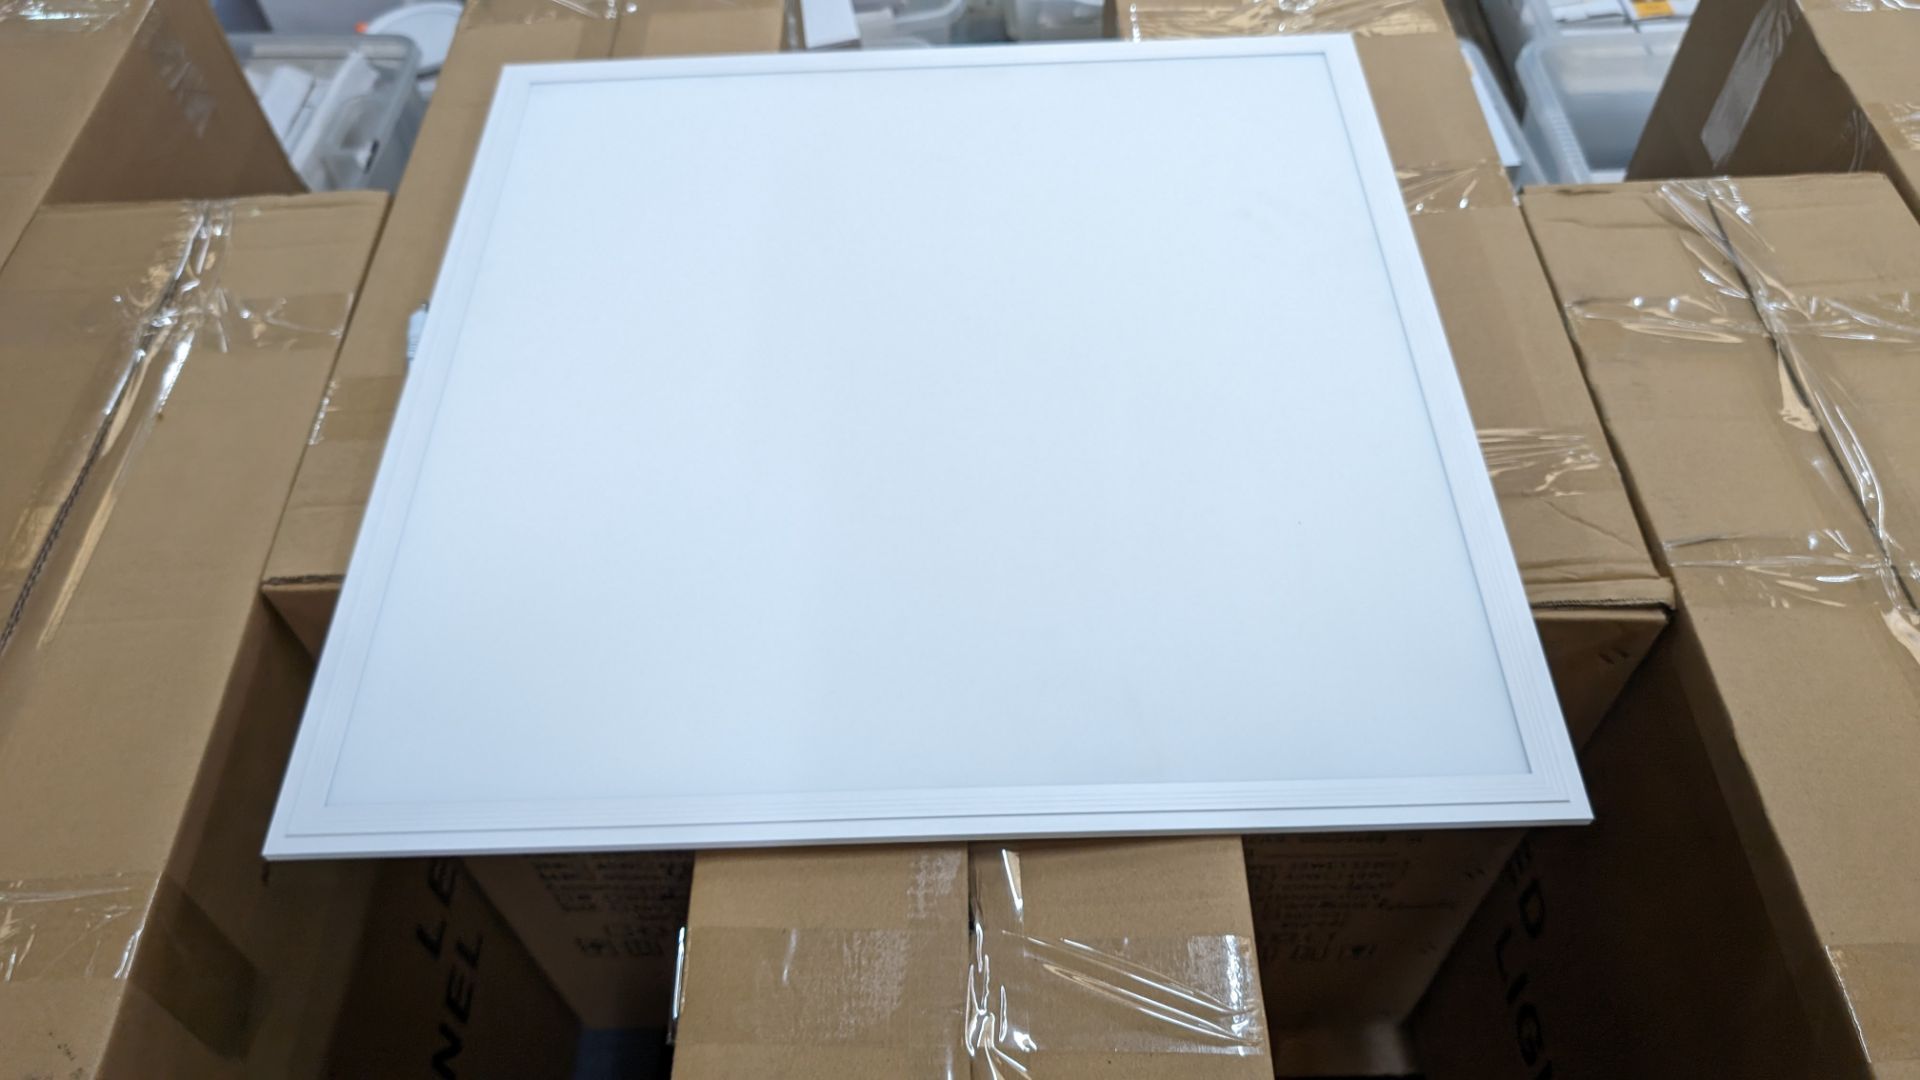 24 off 595mm x 595mm 4000k 45w LED lighting panel, each including driver. This lot comprises 3 cart - Image 3 of 5